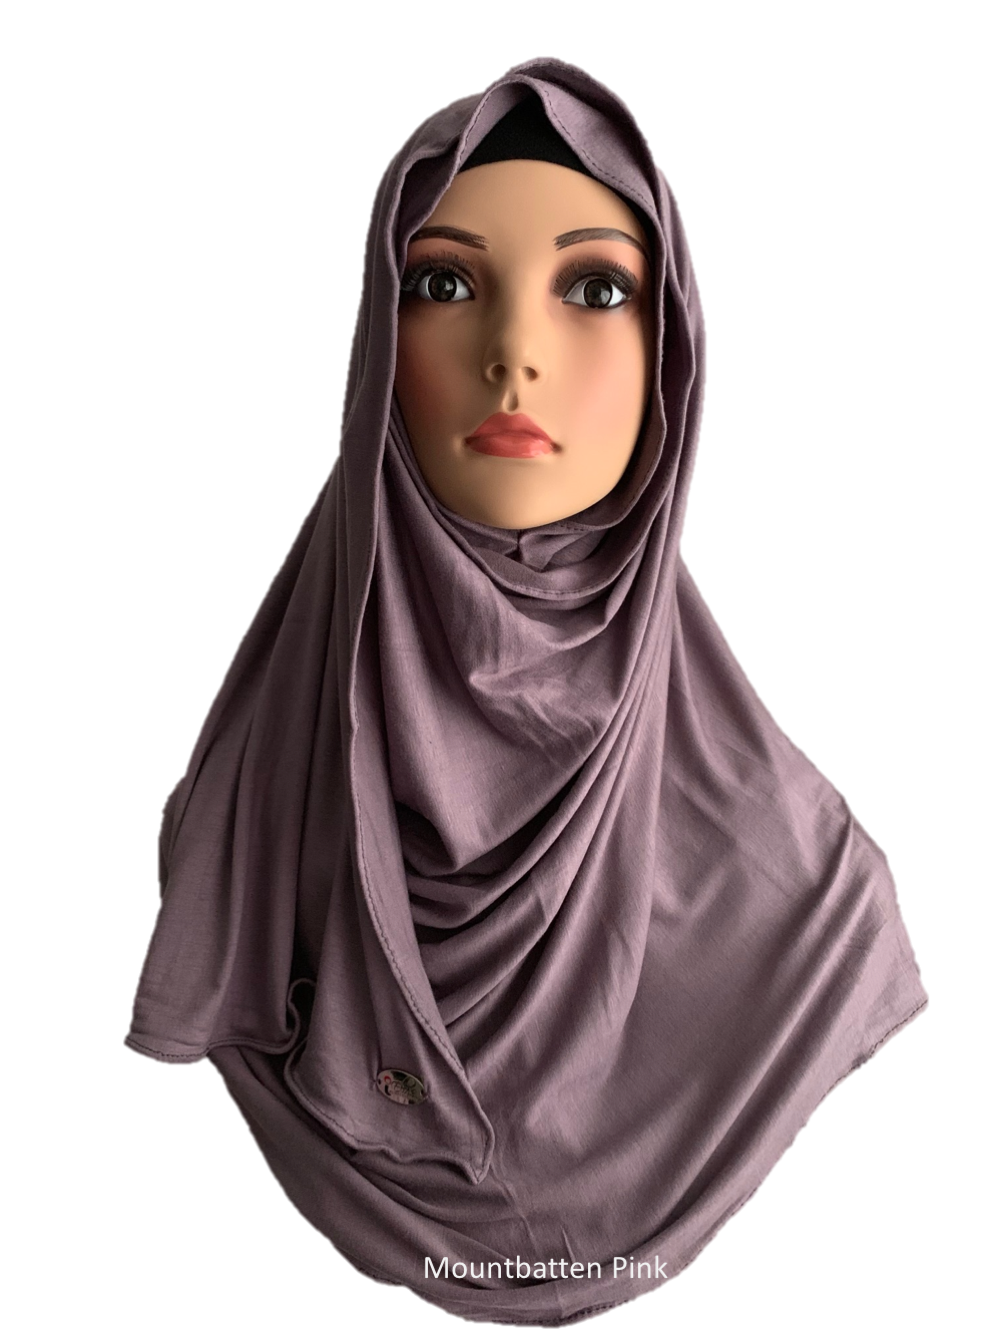 Mountbatten Pink stretchy (COT) instant hijab SF